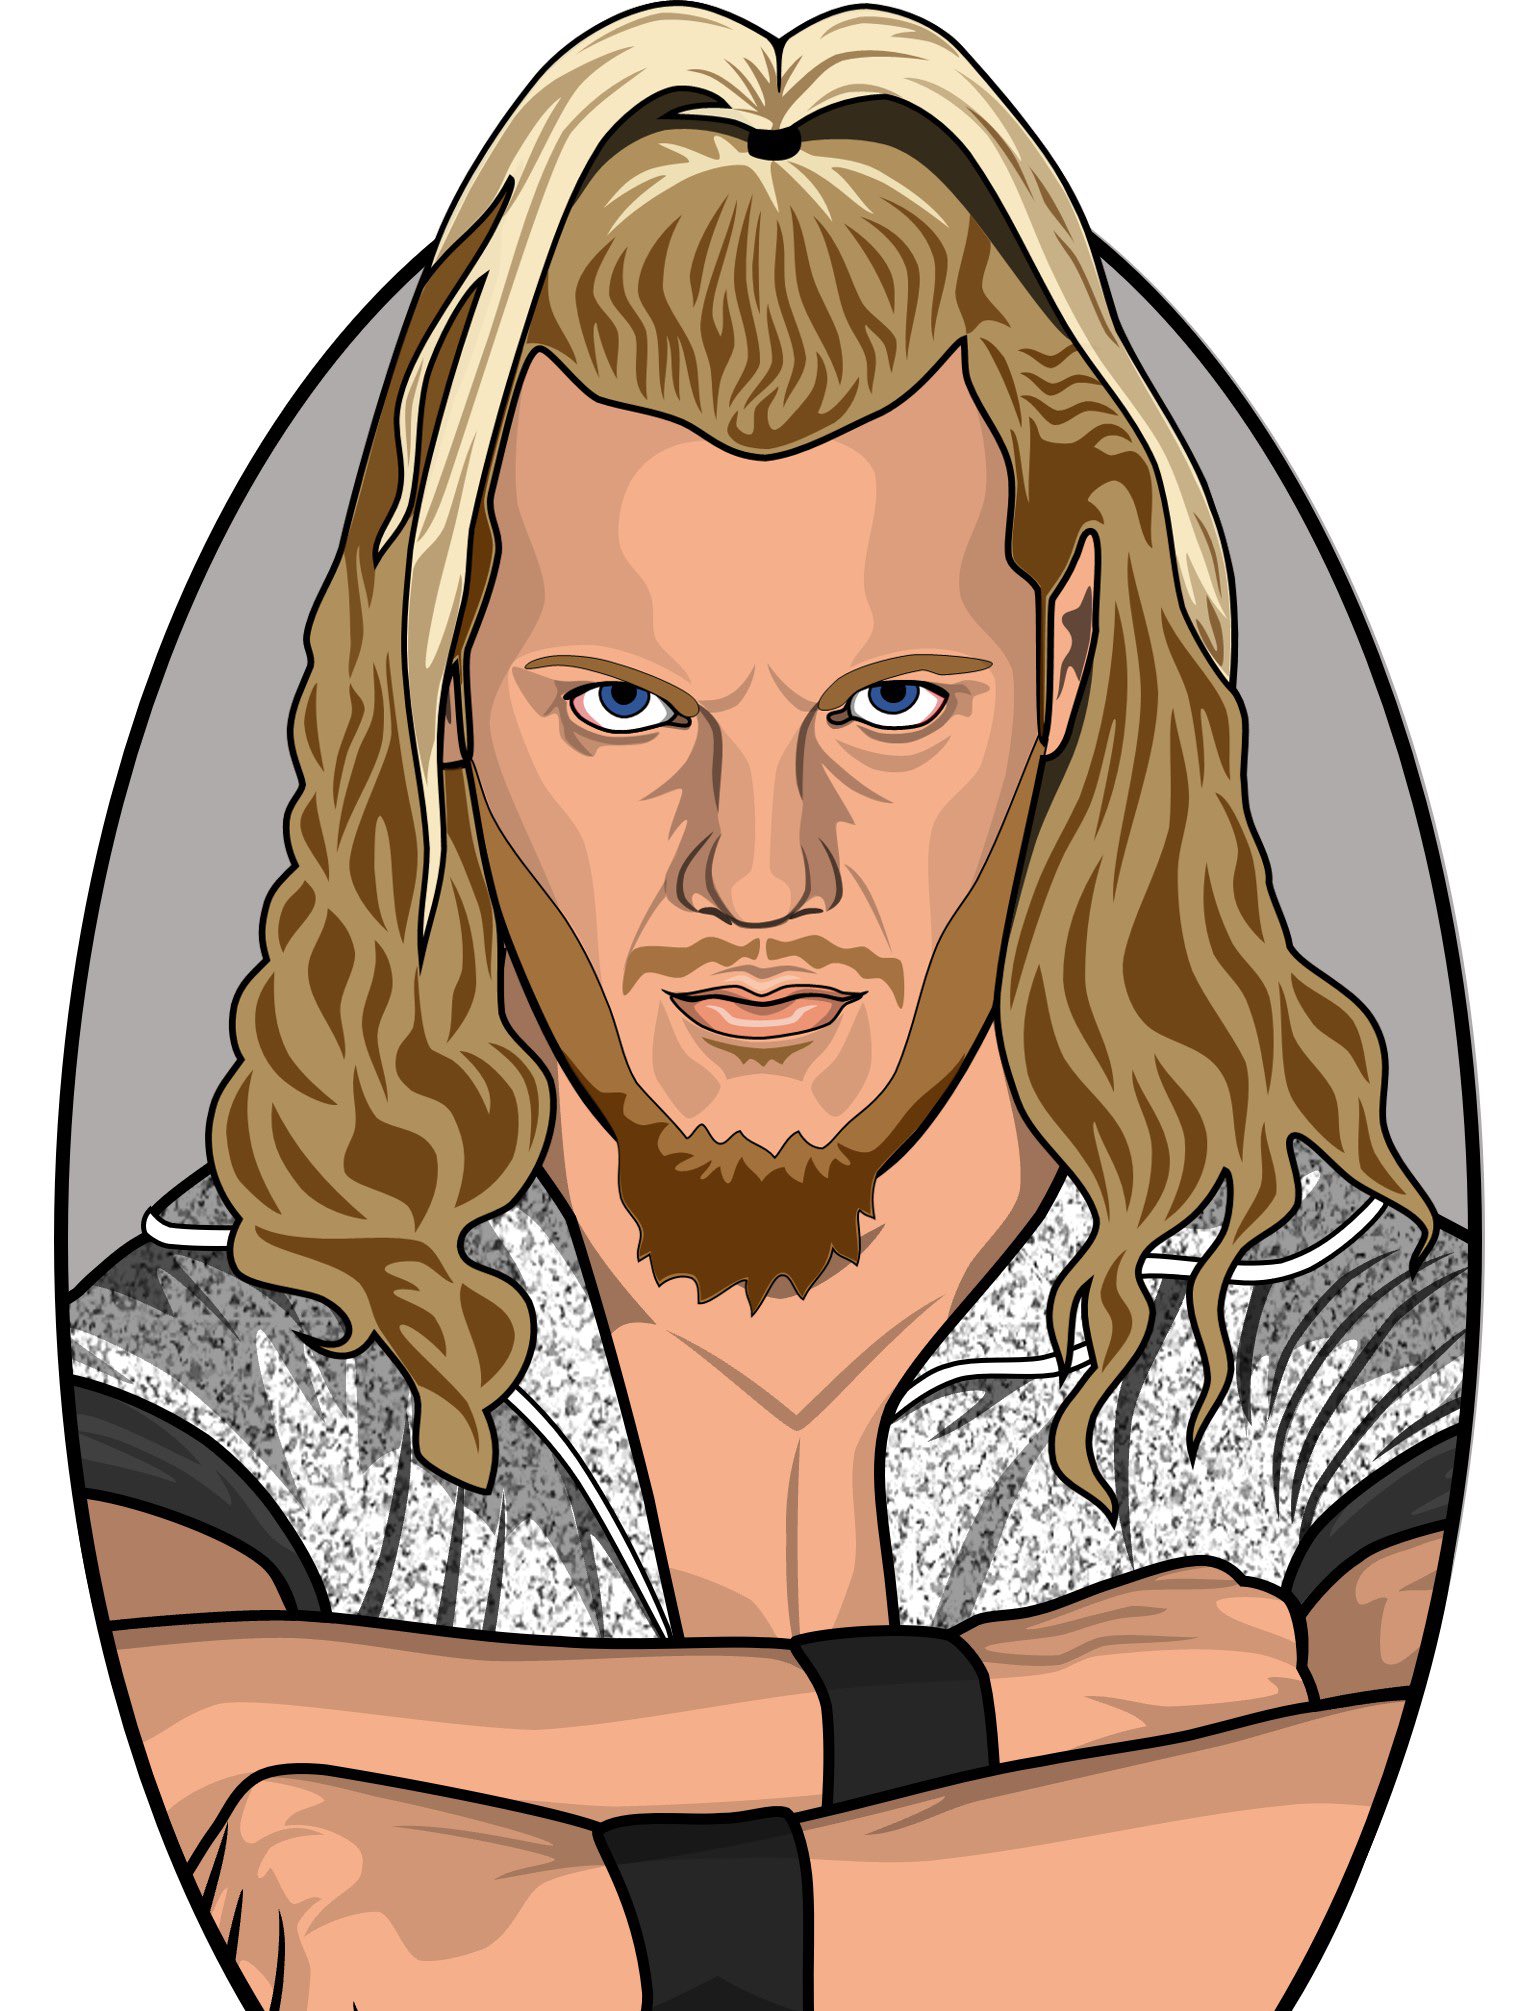 Happy 52nd Birthday to Chris Jericho! So many great personas Lionheart, Y2J, which is your favorite? 